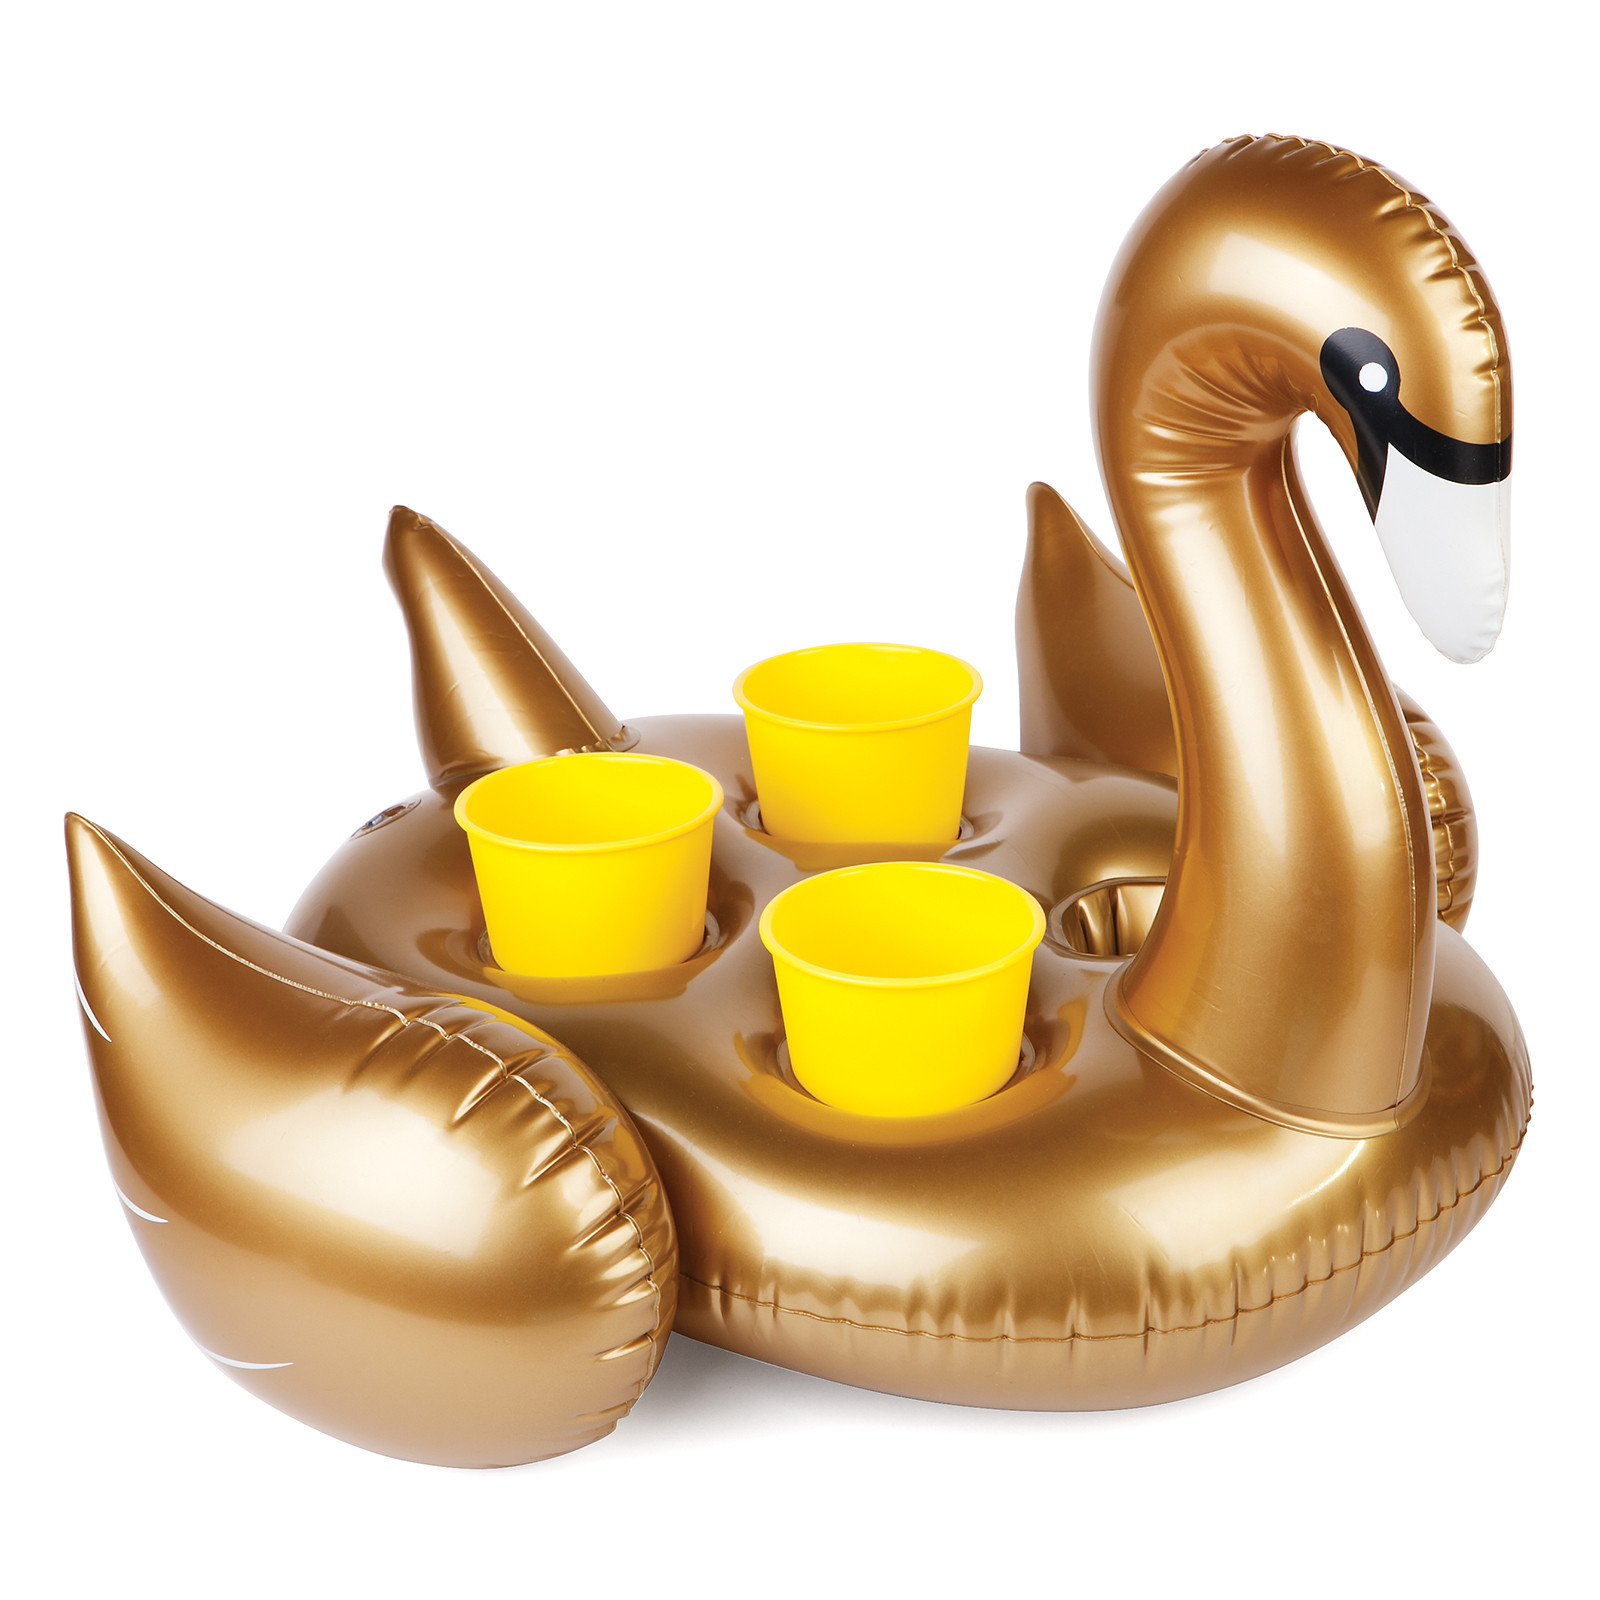 Swan-shaped Water Inflatable With Cup Holders - Groovy Swan Gold